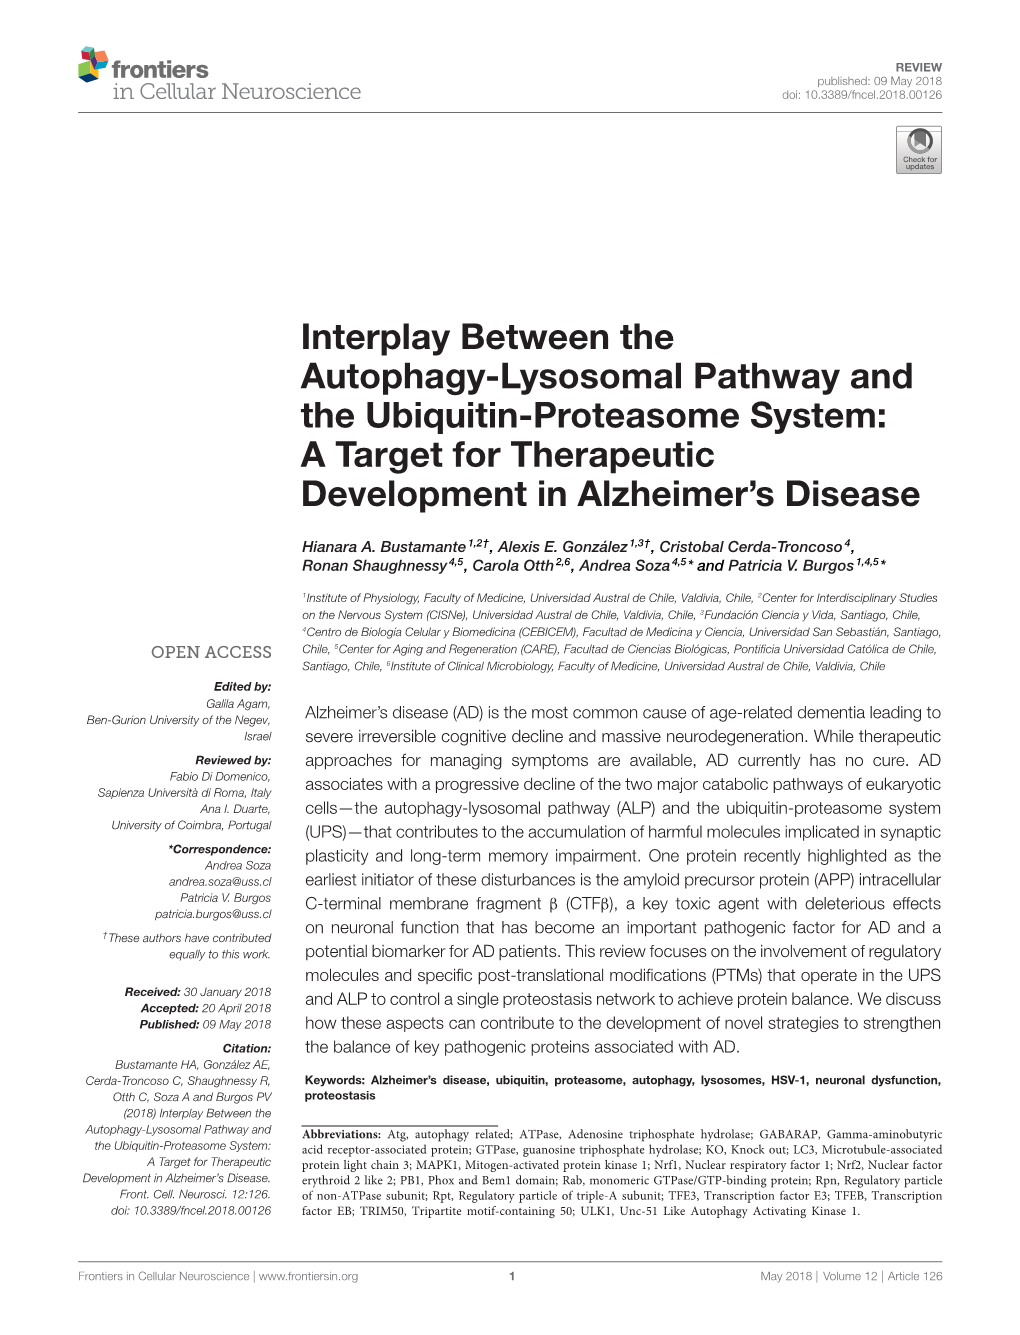 A Target for Therapeutic Development in Alzheimer's Disease